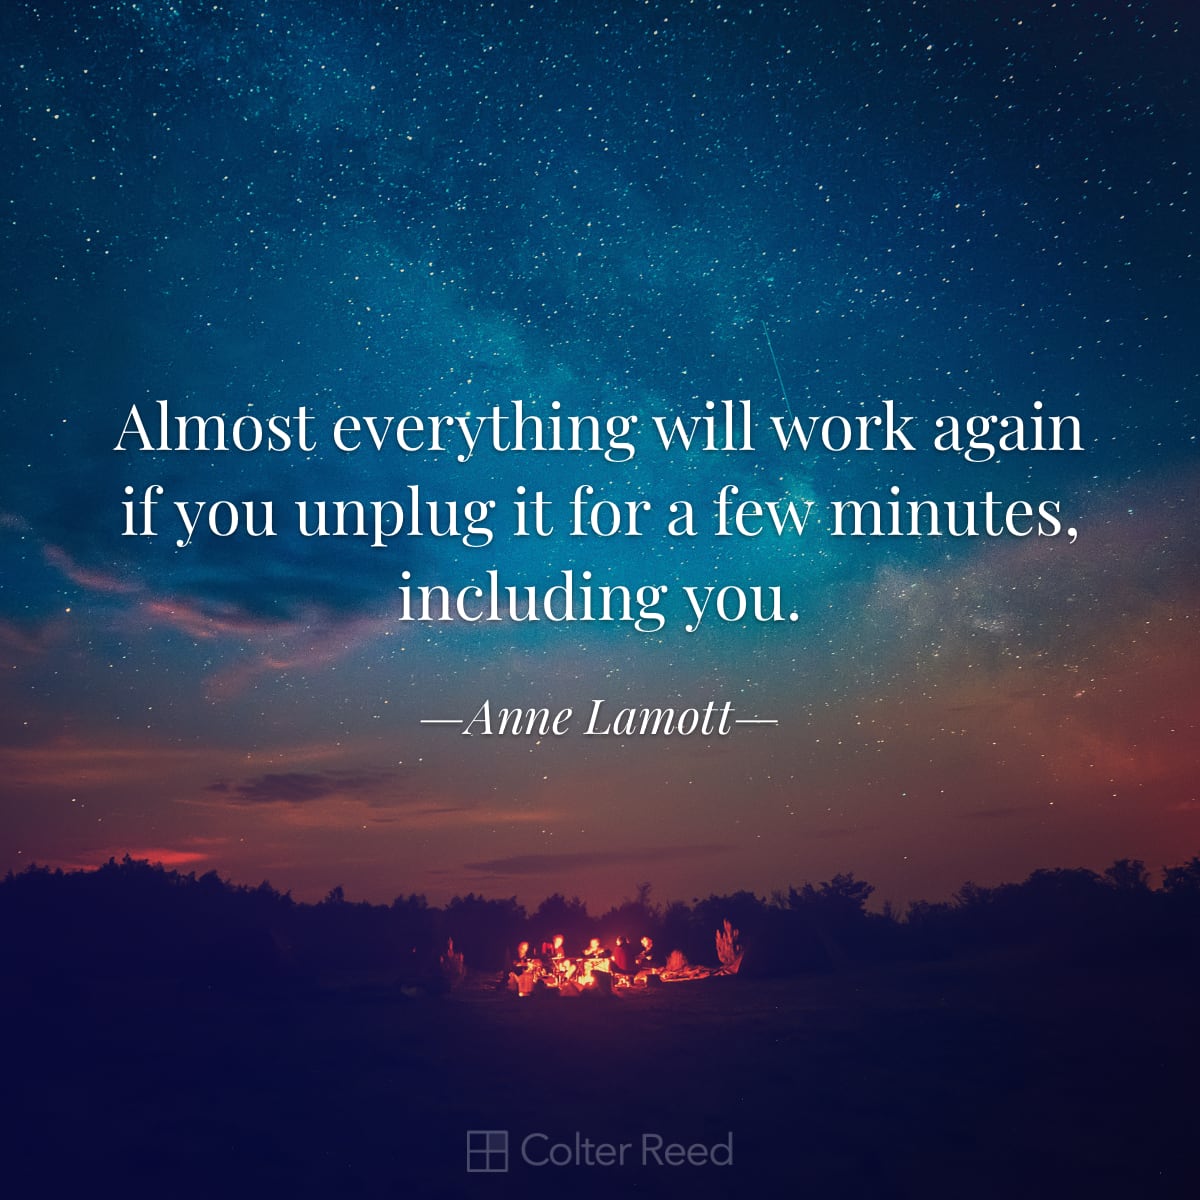 Almost everything will work again if you unplug it for a few minutes, including you. —Anne Lamott